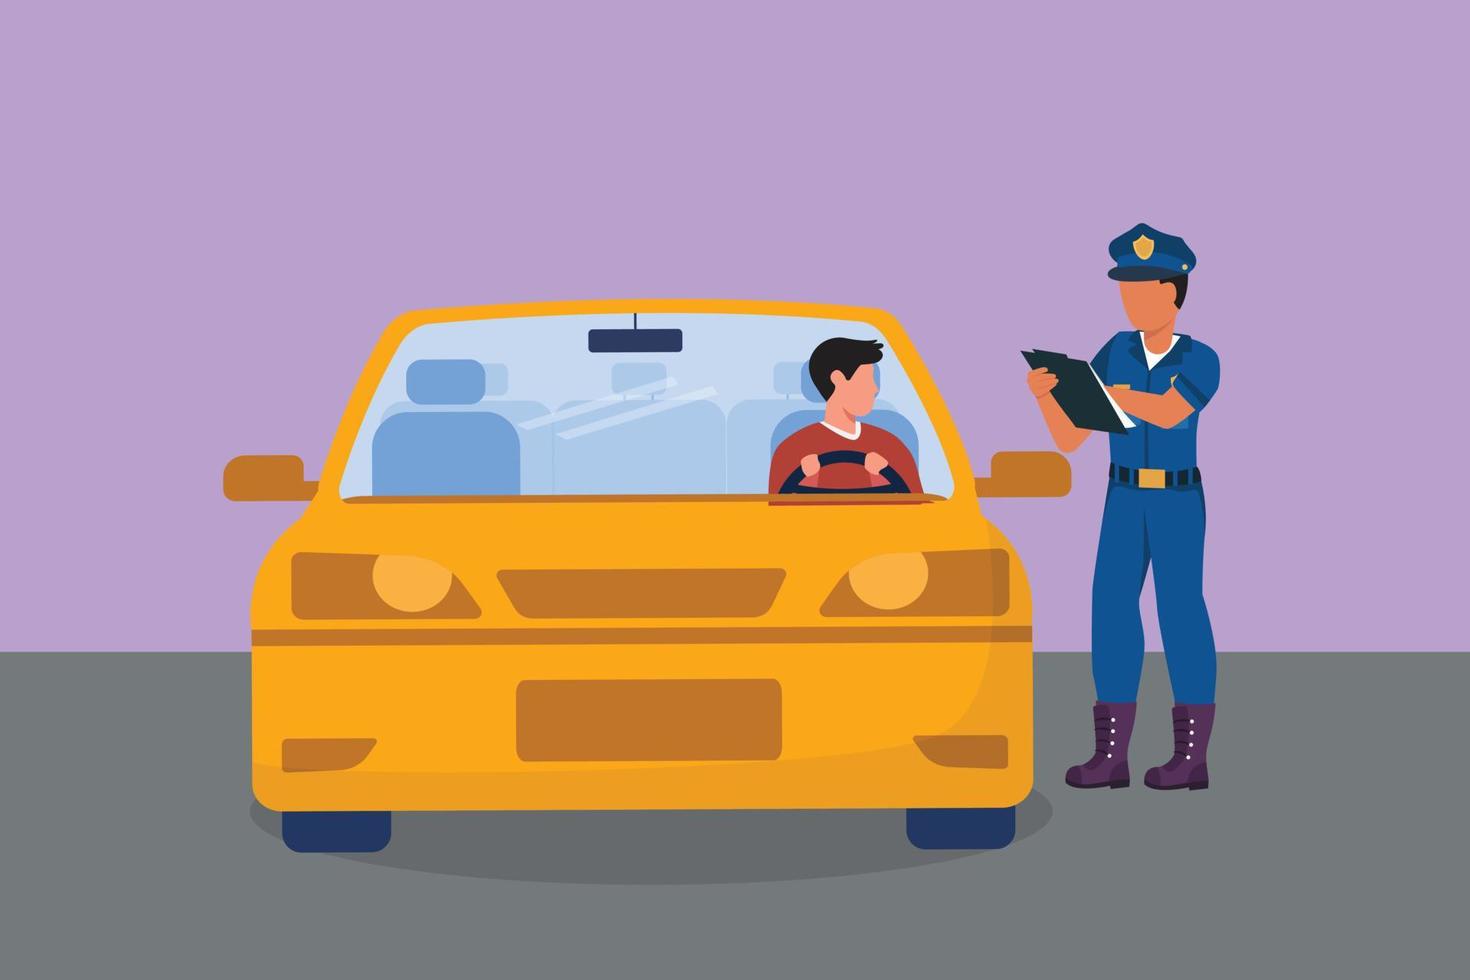 Cartoon flat style drawing policeman with uniform is ticketing a driver who uses a car for violating traffic signs. Regulations enforcement on roadway concept. Graphic draw design vector illustration